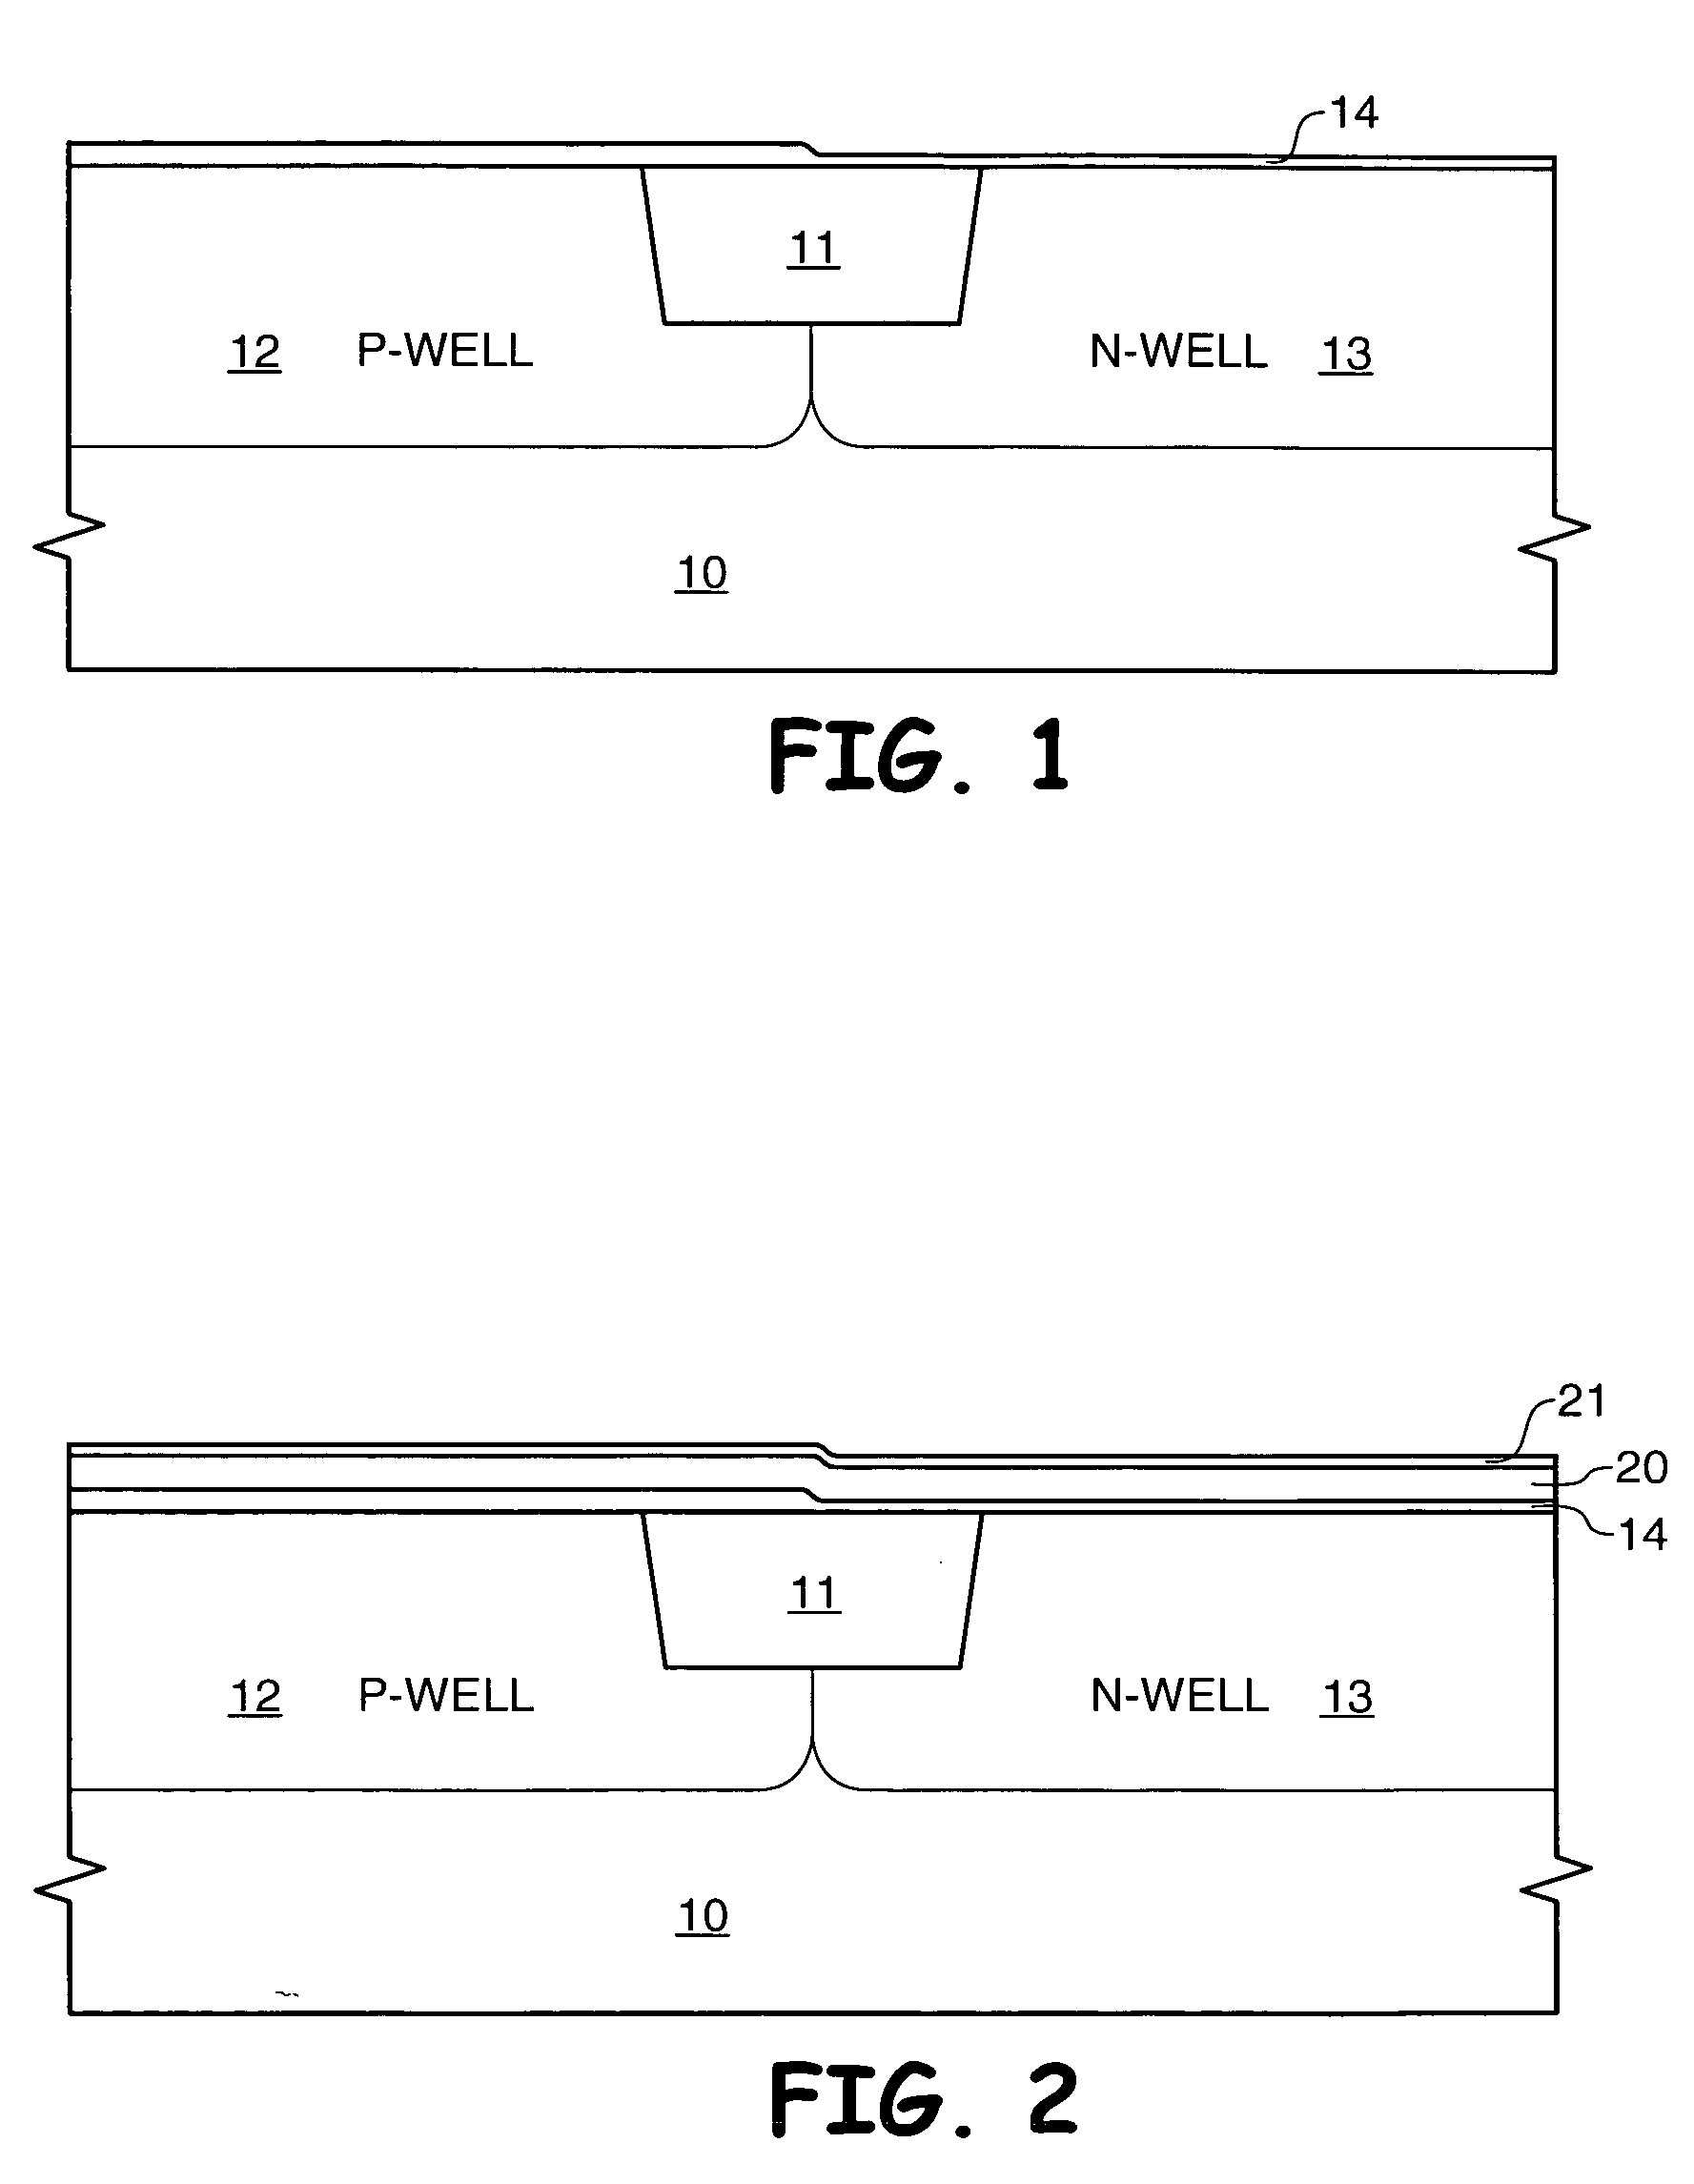 Methods of enabling polysilicon gate electrodes for high-k gate dieletrics